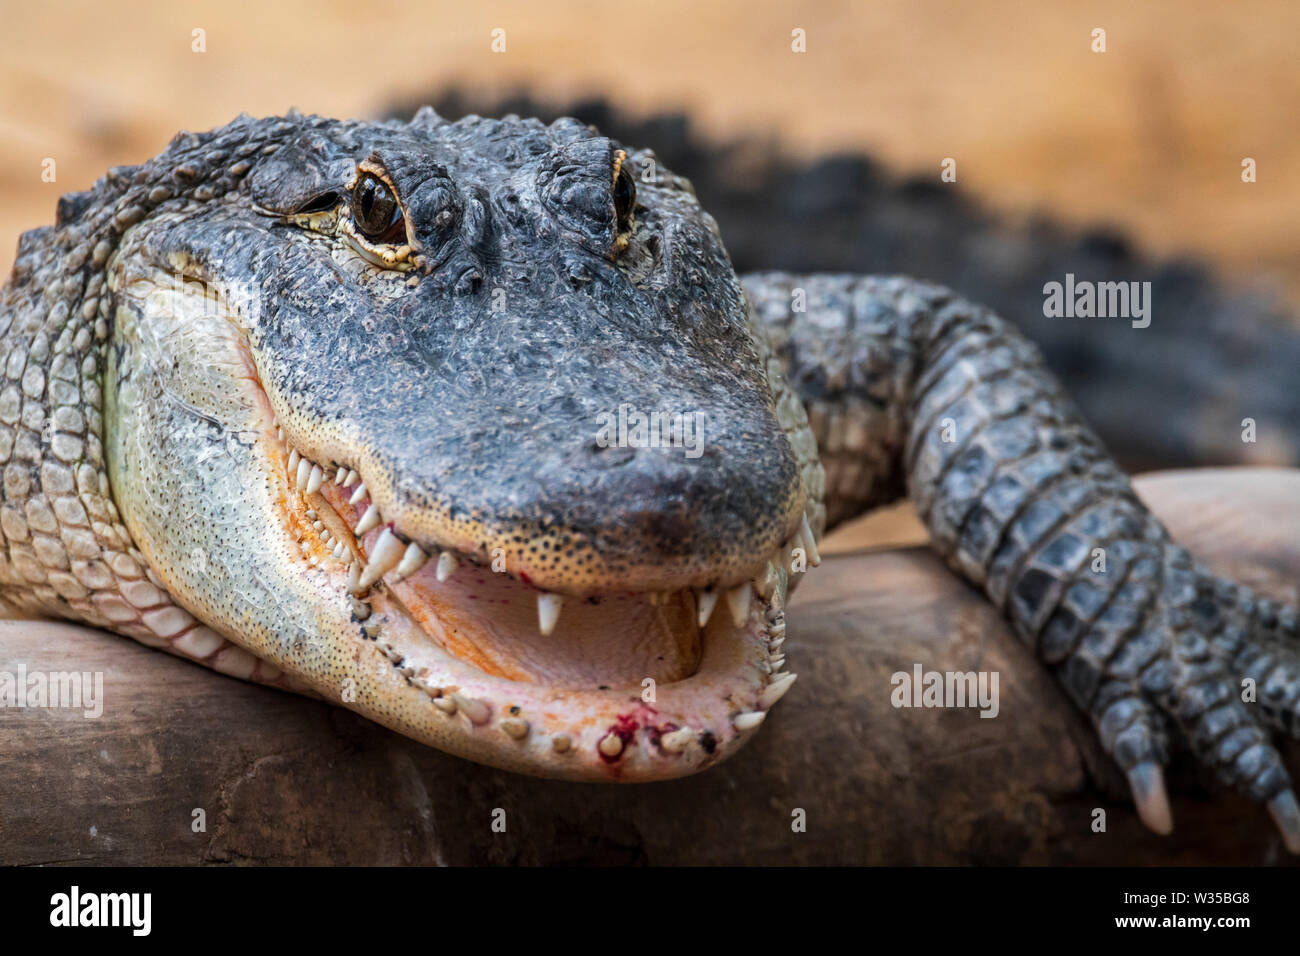 American alligator / gator / common alligator (Alligator mississippiensis) close-up of open snout showing teeth Stock Photo